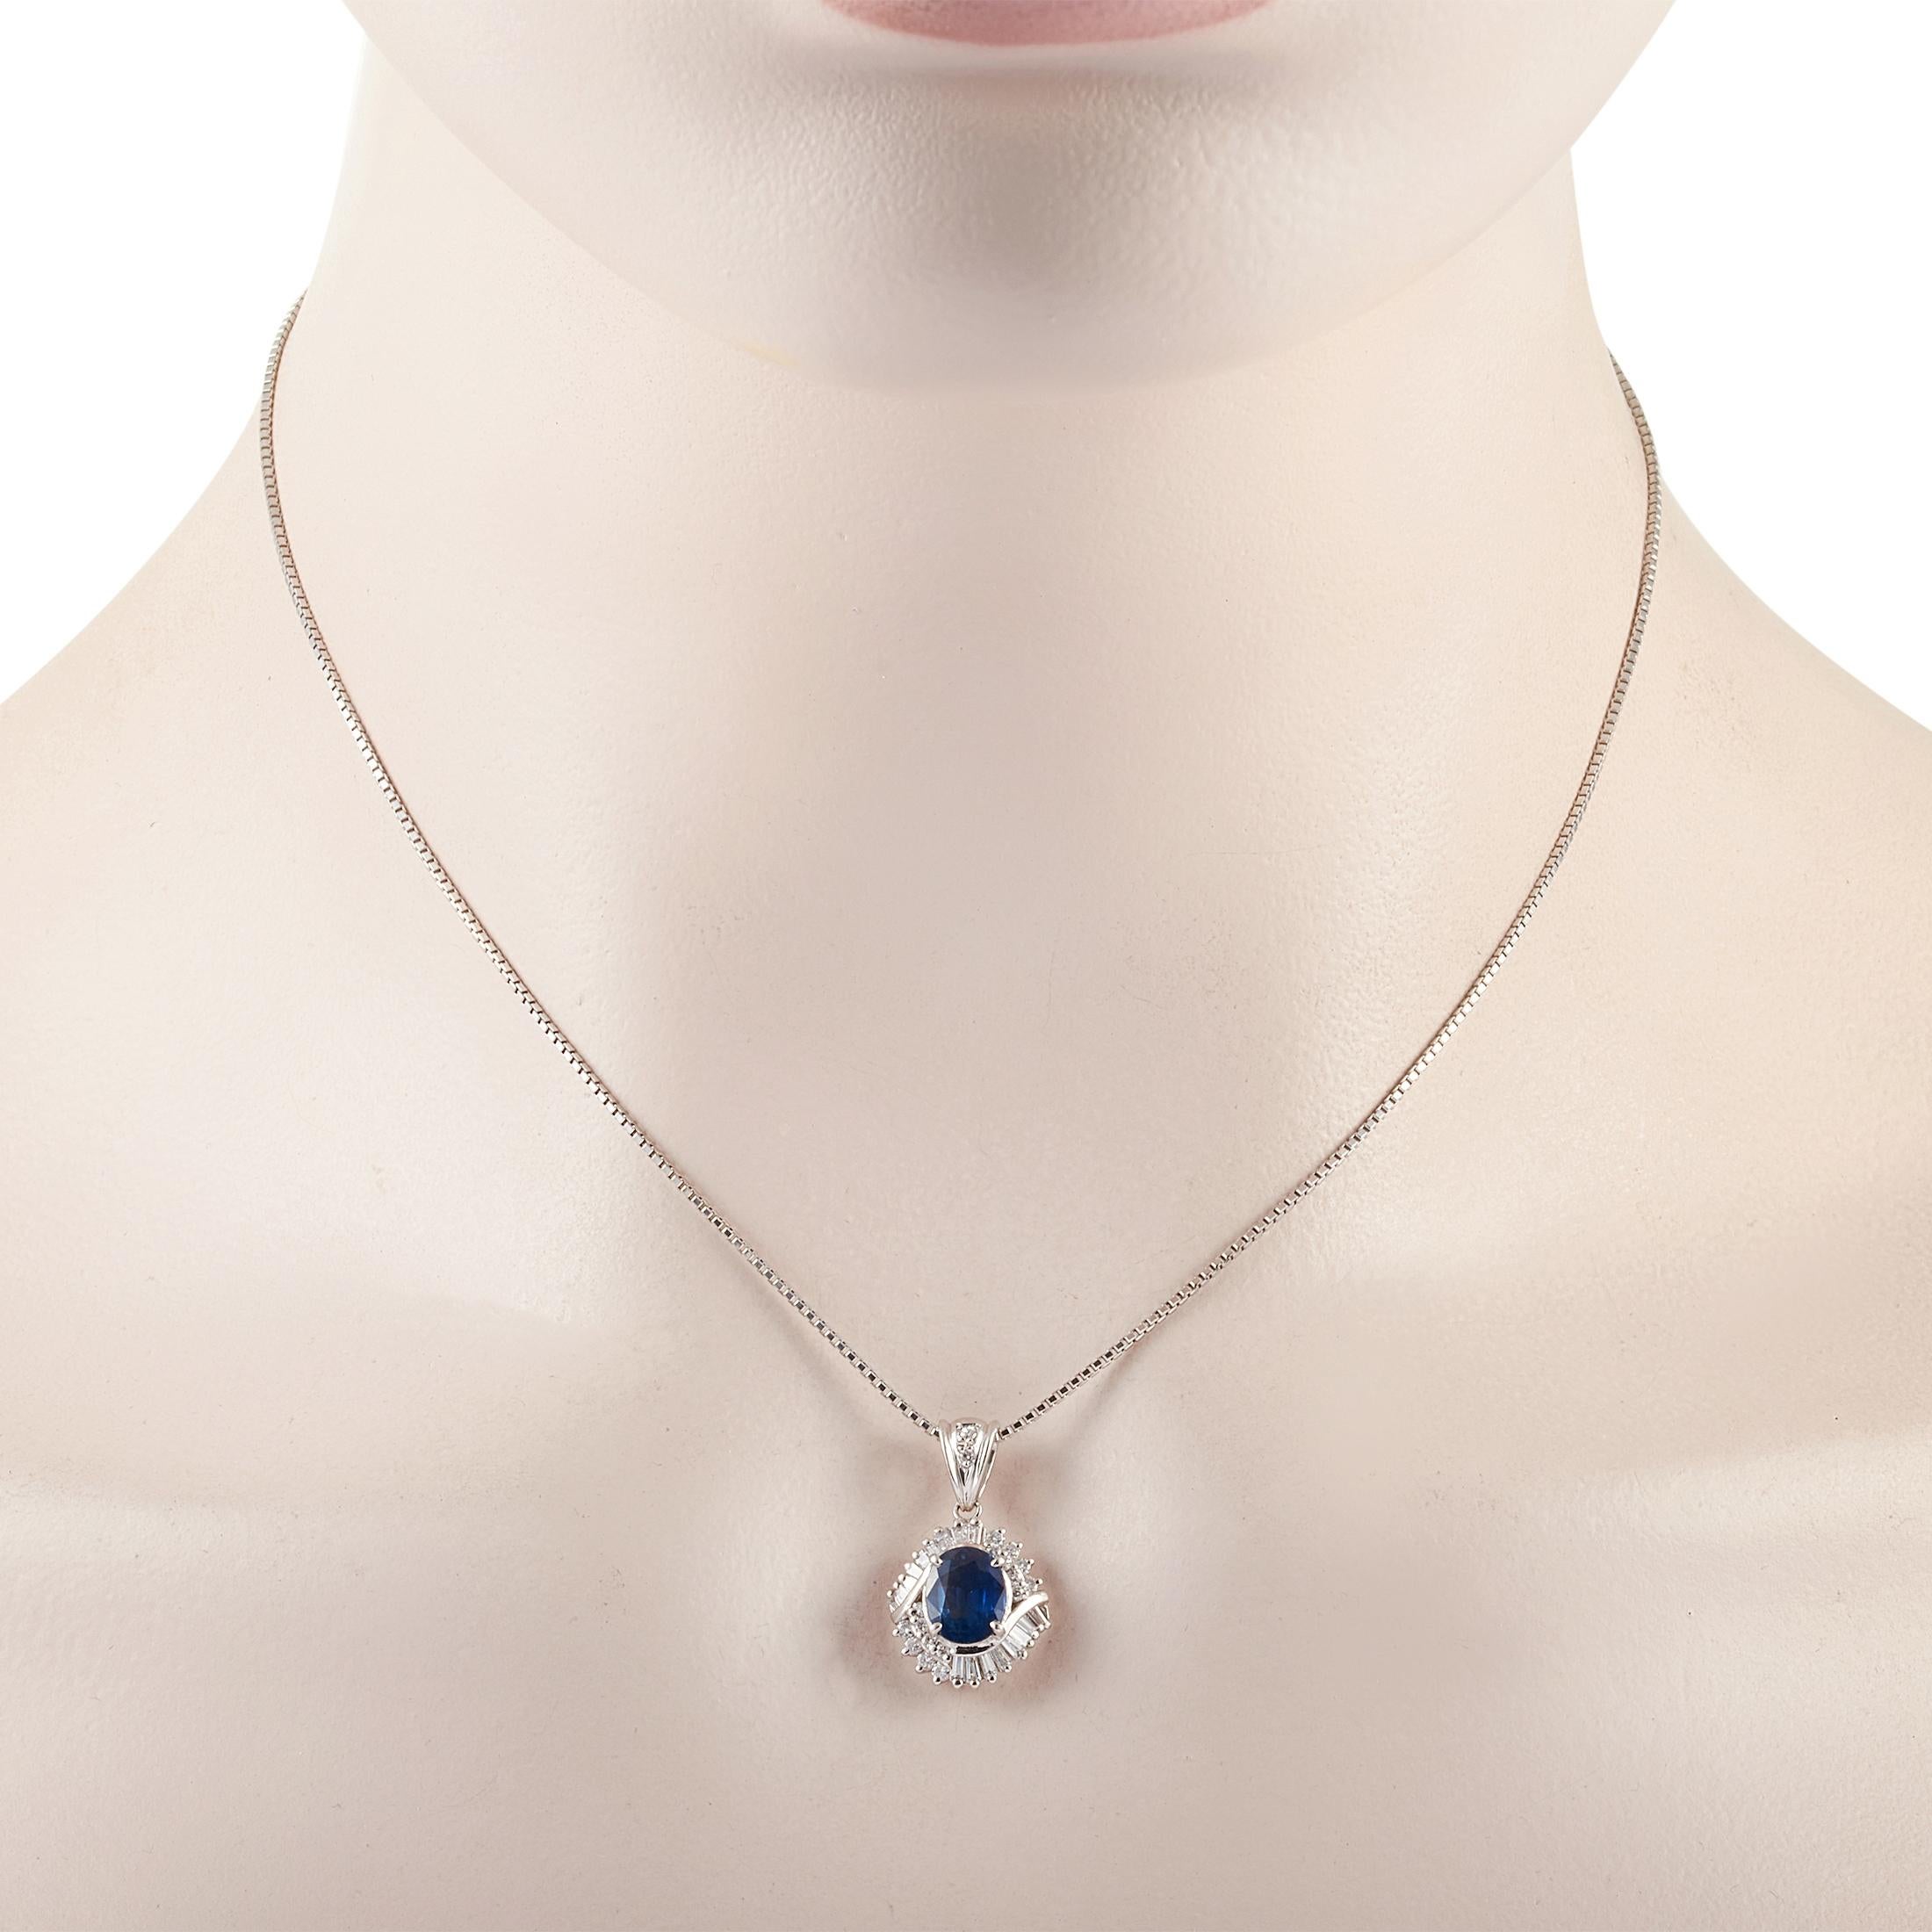 This LB Exclusive necklace is crafted from platinum and weighs 7.9 grams. It is presented with a 15” chain and boasts a pendant that measures 0.88” in length and 0.50” in width. The necklace is set with a 1.64 ct sapphire and a total of 0.50 carats